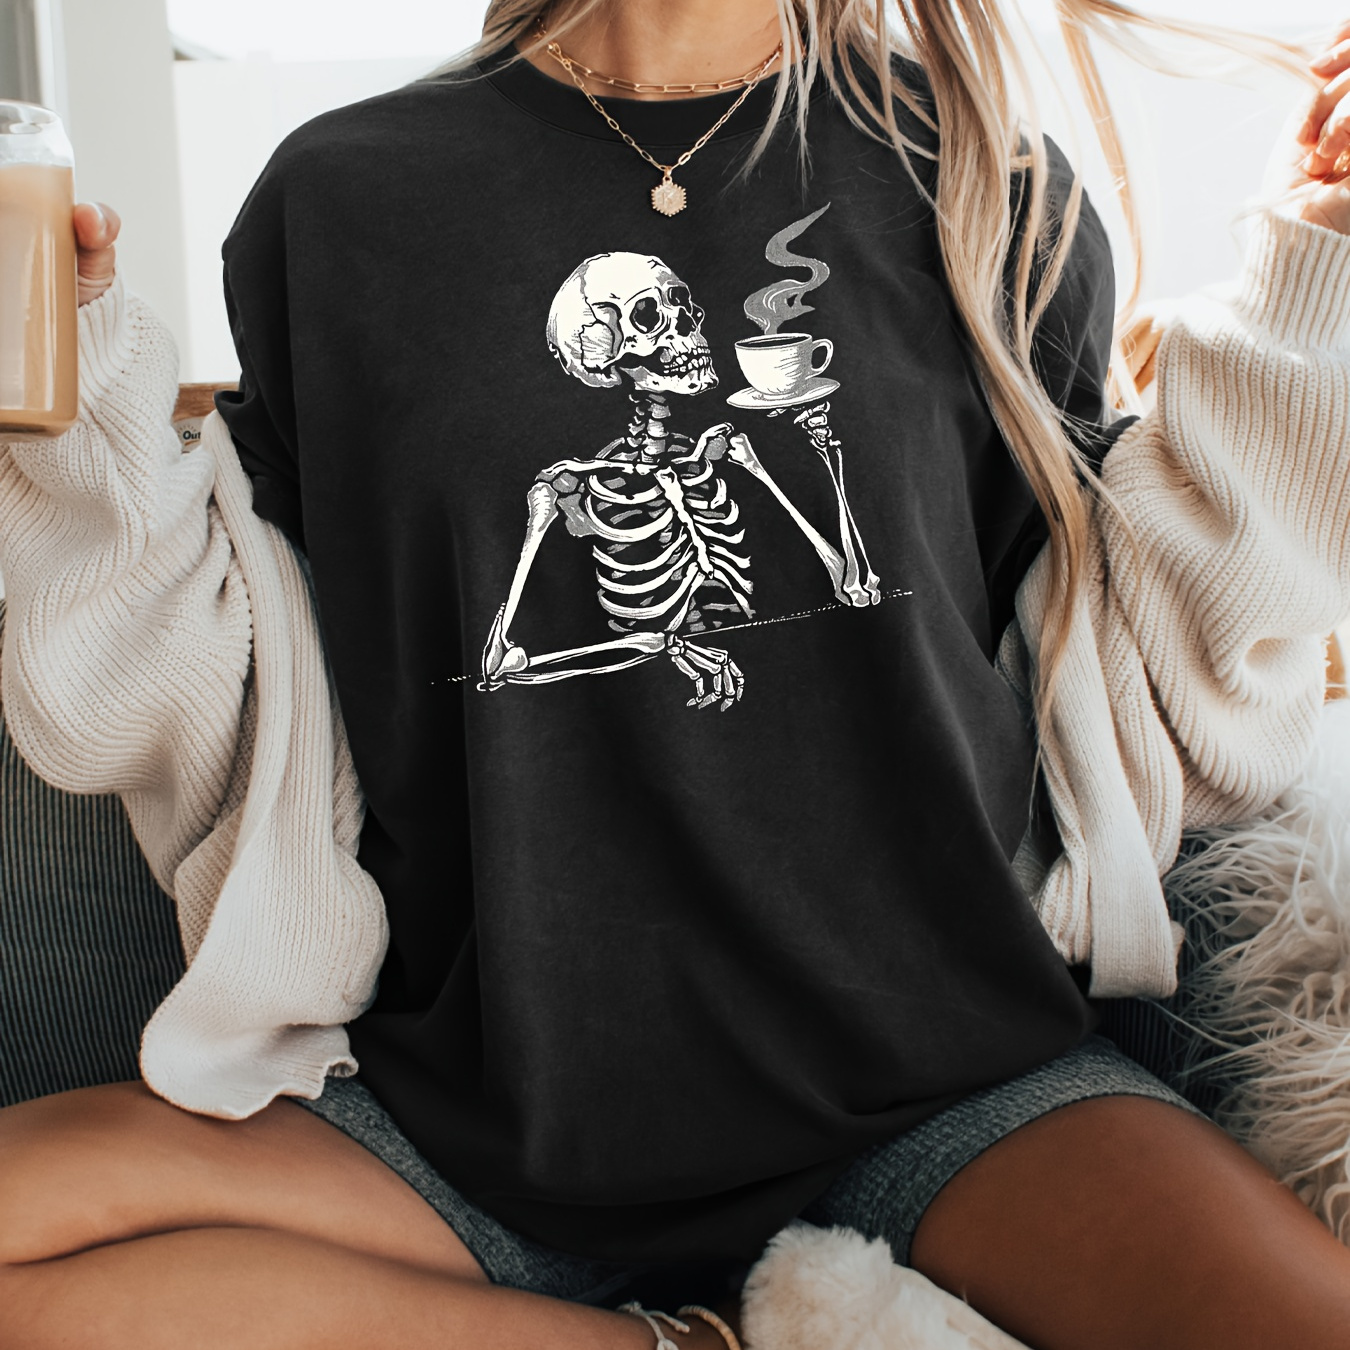 

Skeleton Print T-shirt, Short Sleeve Crew Neck Casual Top For Summer & Spring, Women's Clothing